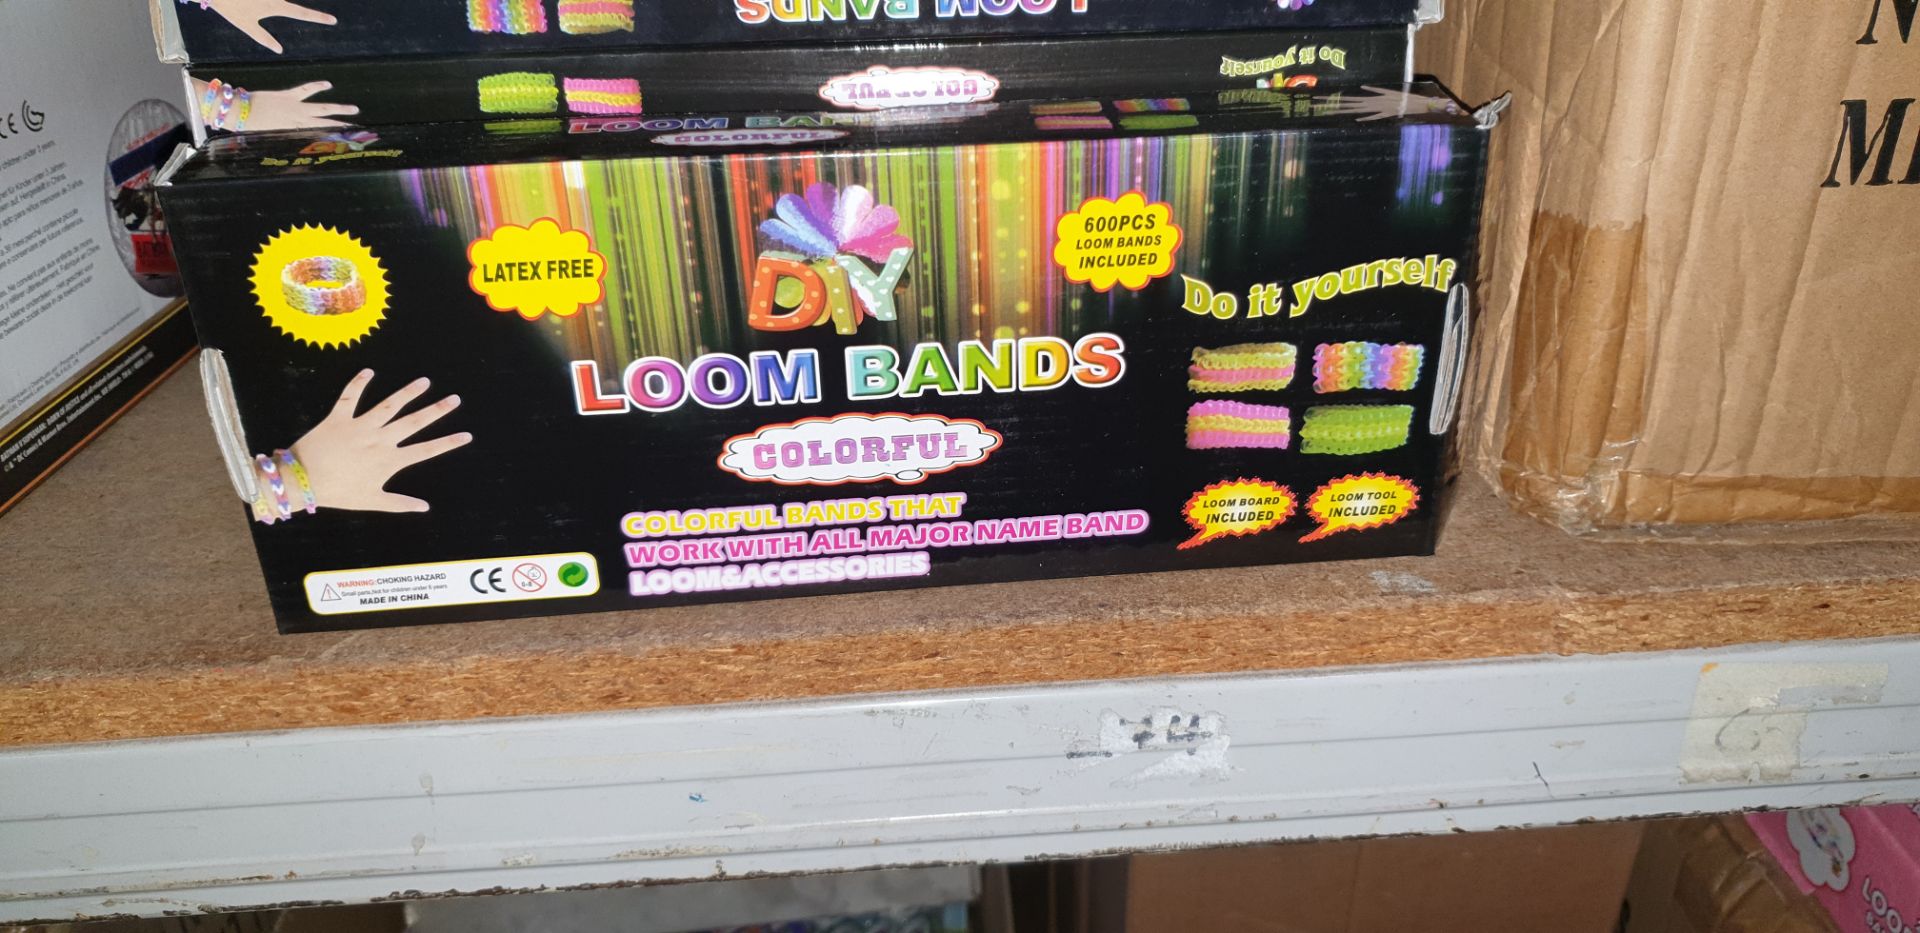 60 boxes of Loom Bands (one carton)